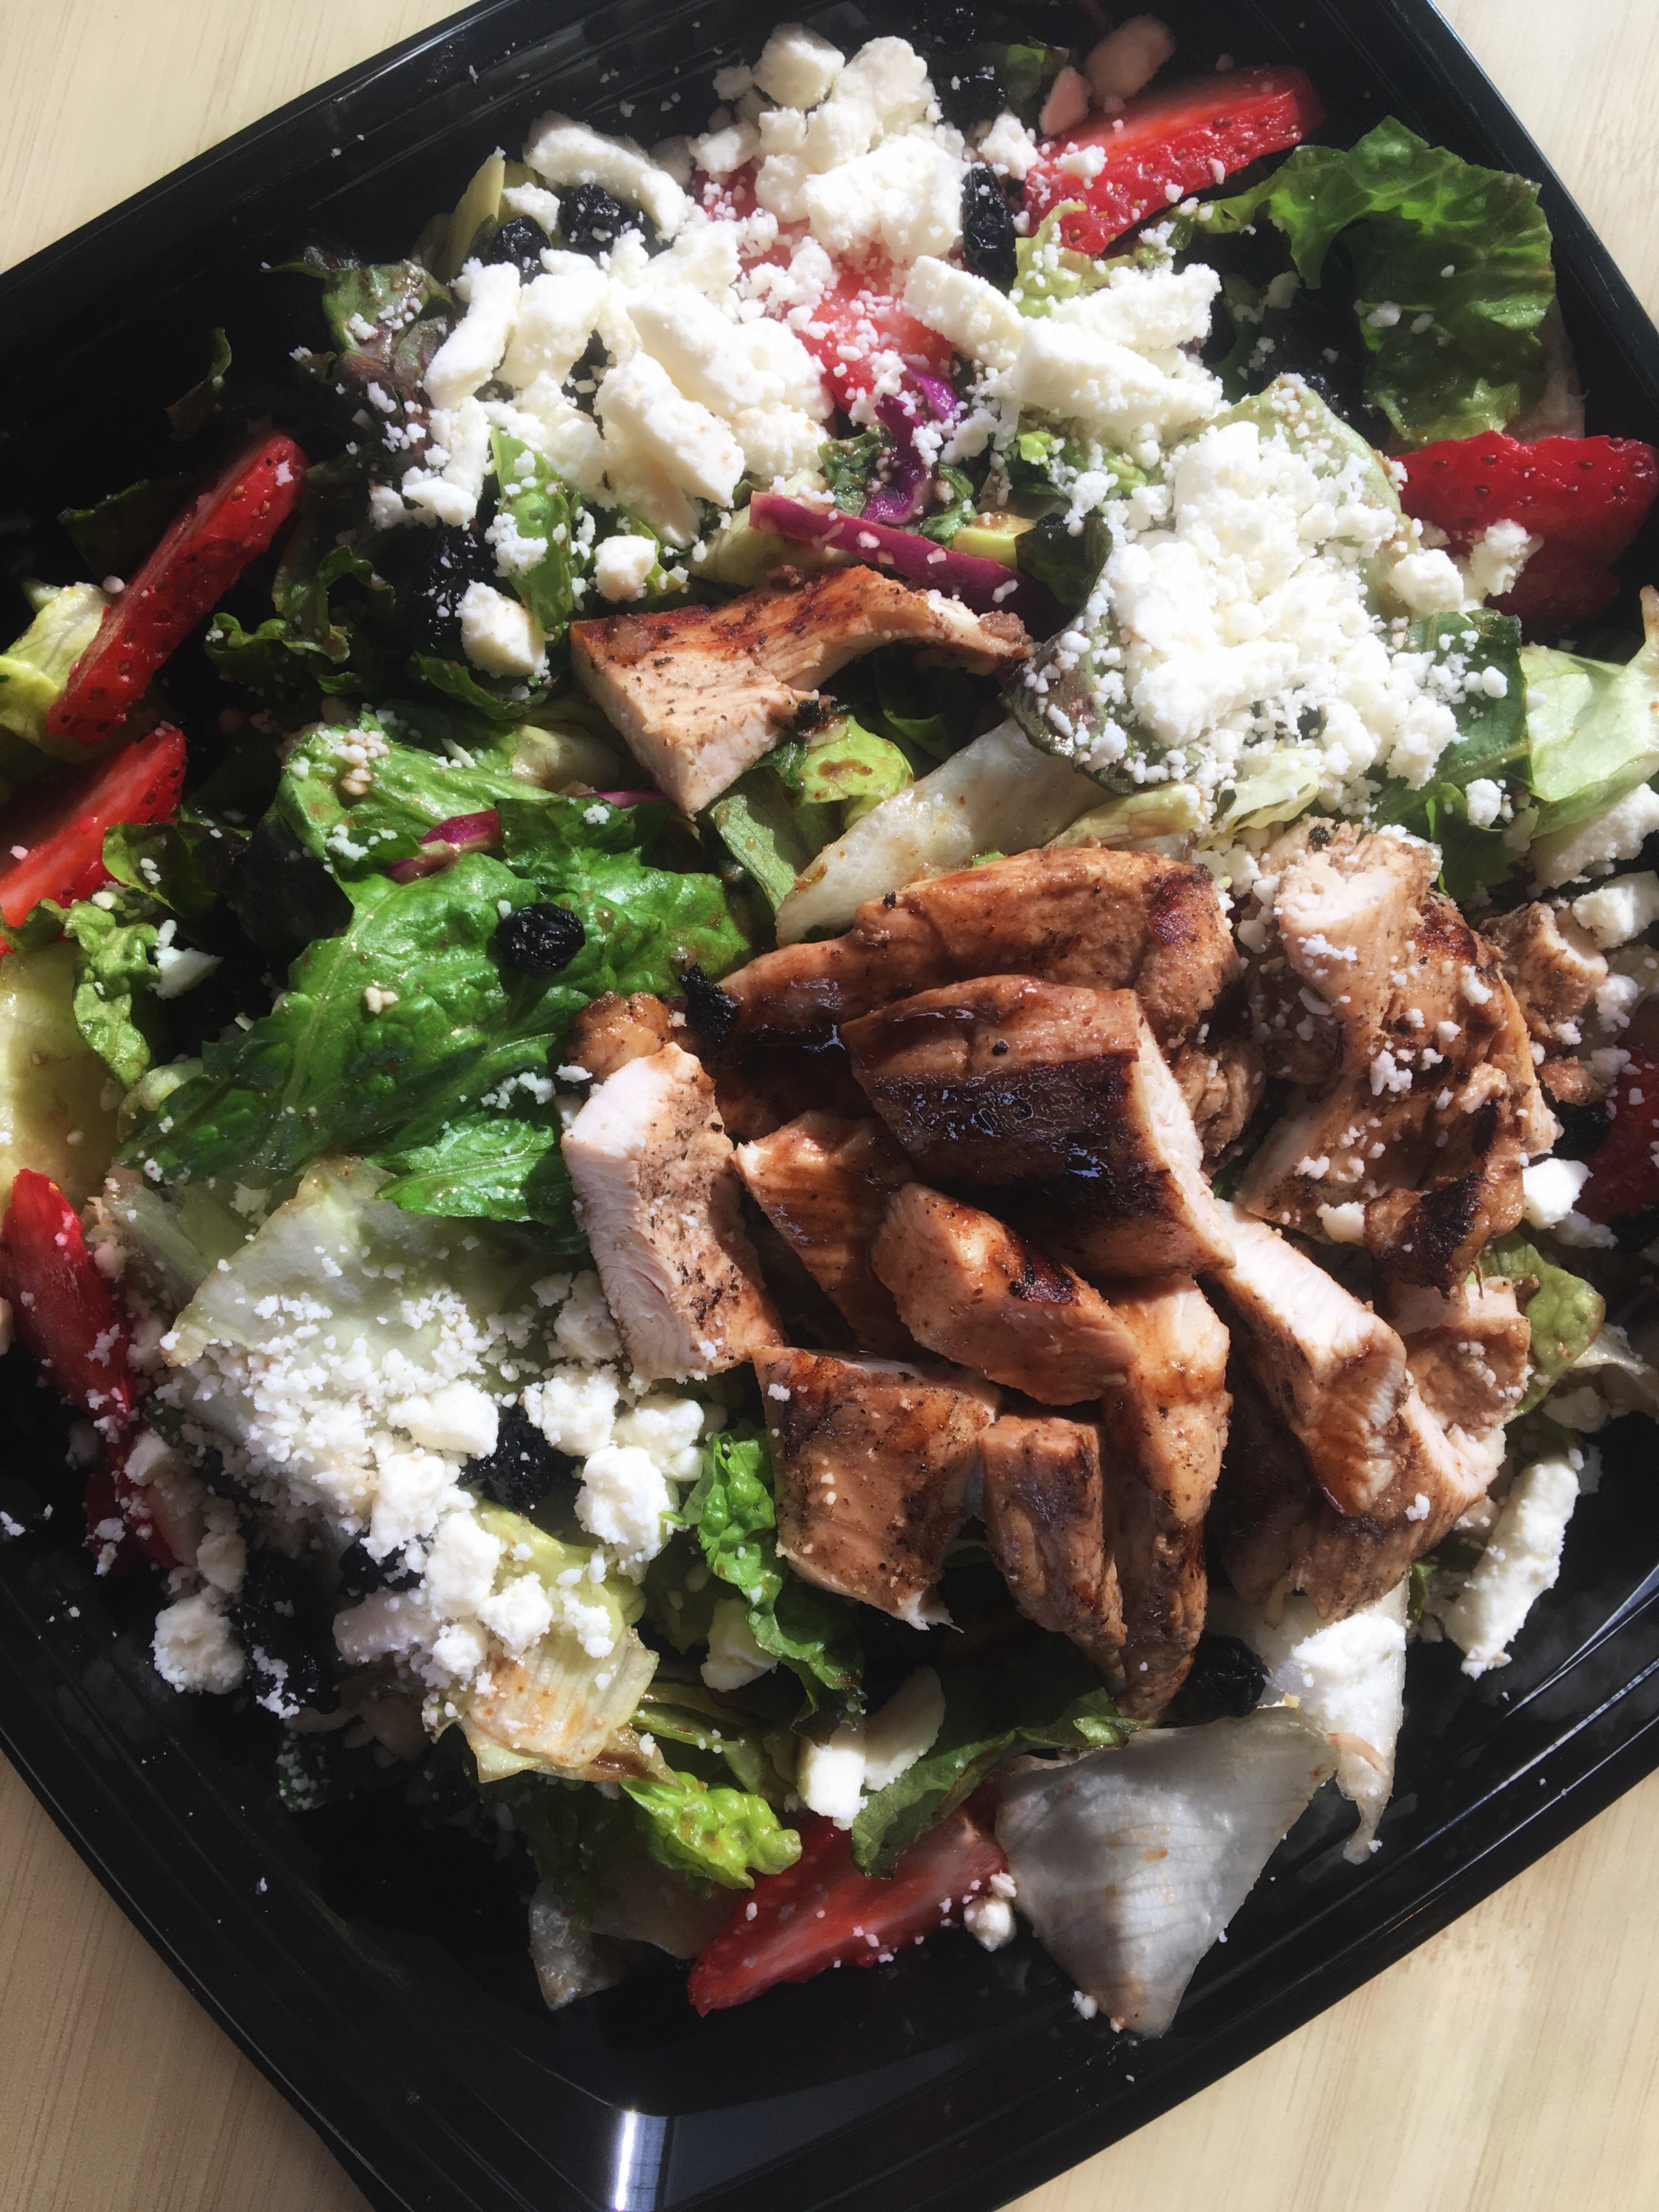 The Habit Burger Grill Brings Back Strawberry Balsamic Chicken Salad This Summer